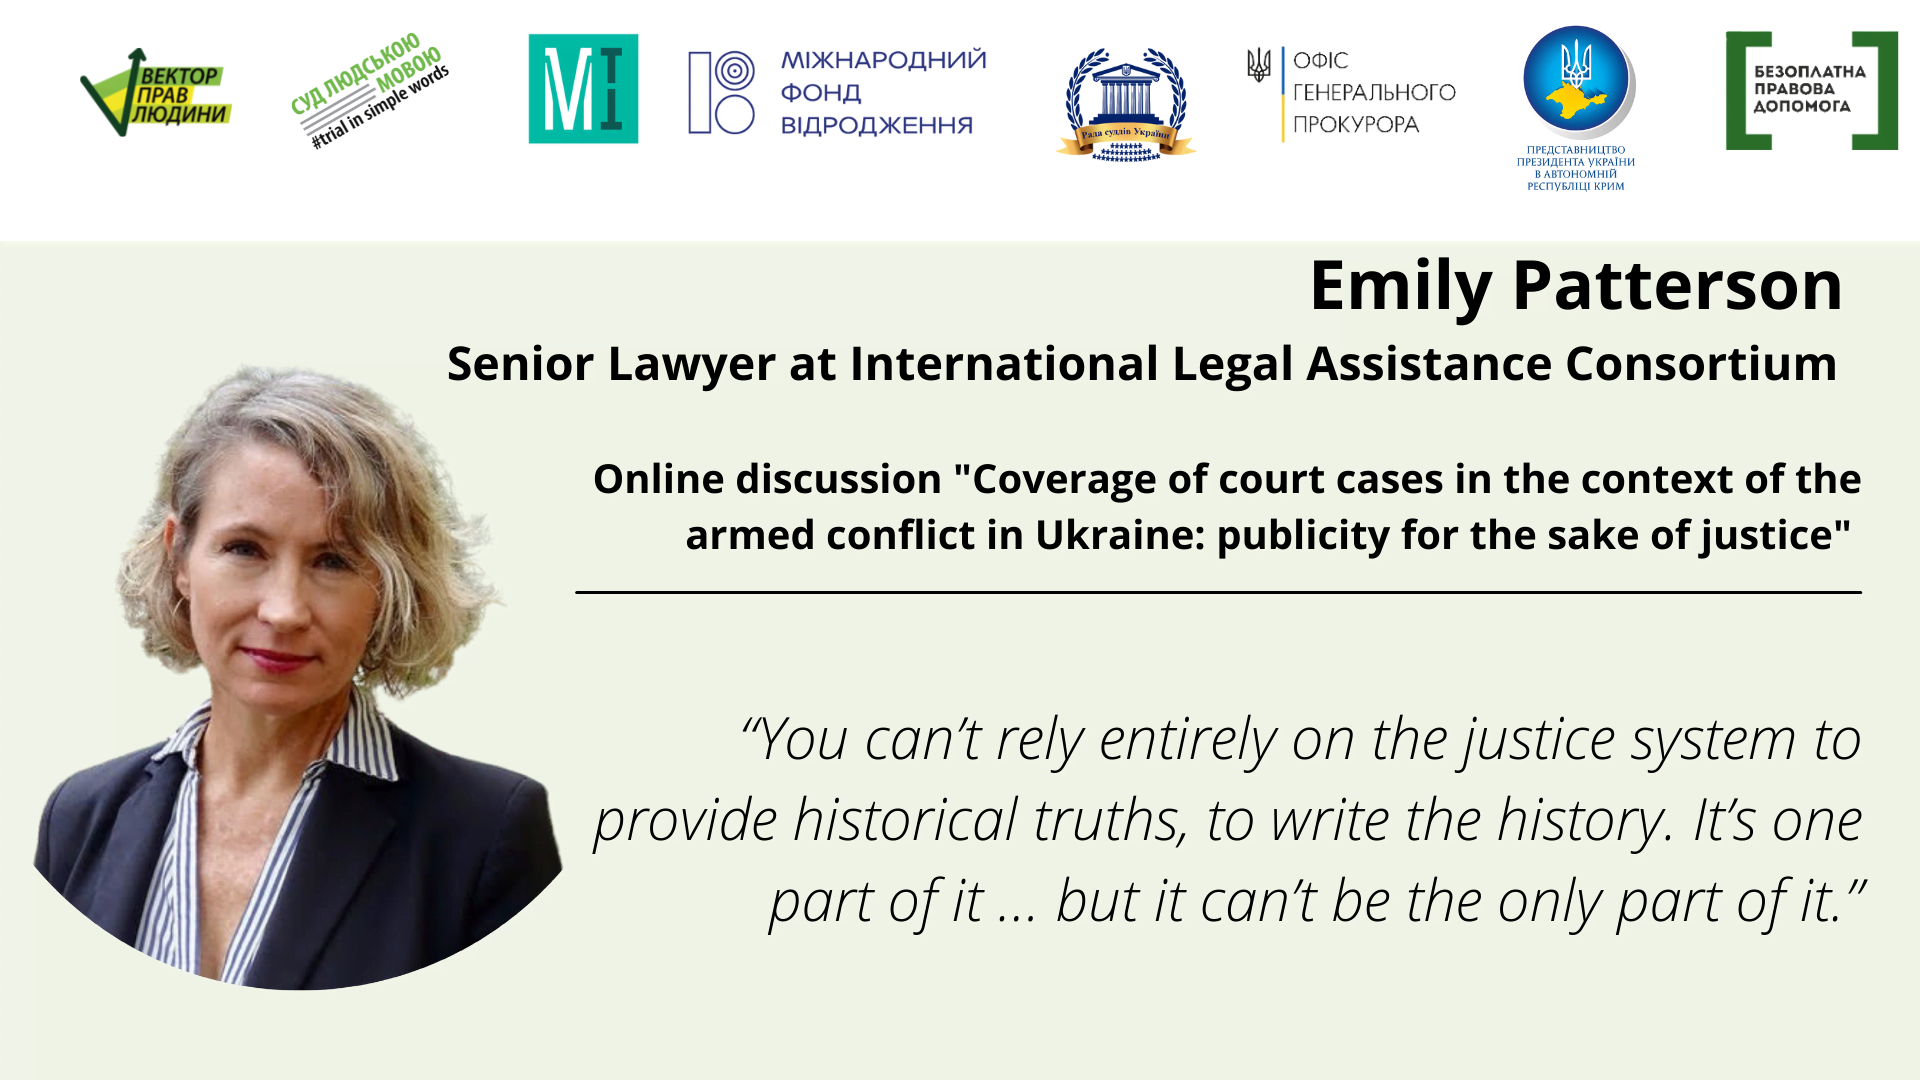 “International Best Practices for Ensuring the Right to a Public and Accessible Trial in Cases Involving Armed Conflict” by Emily Patterson